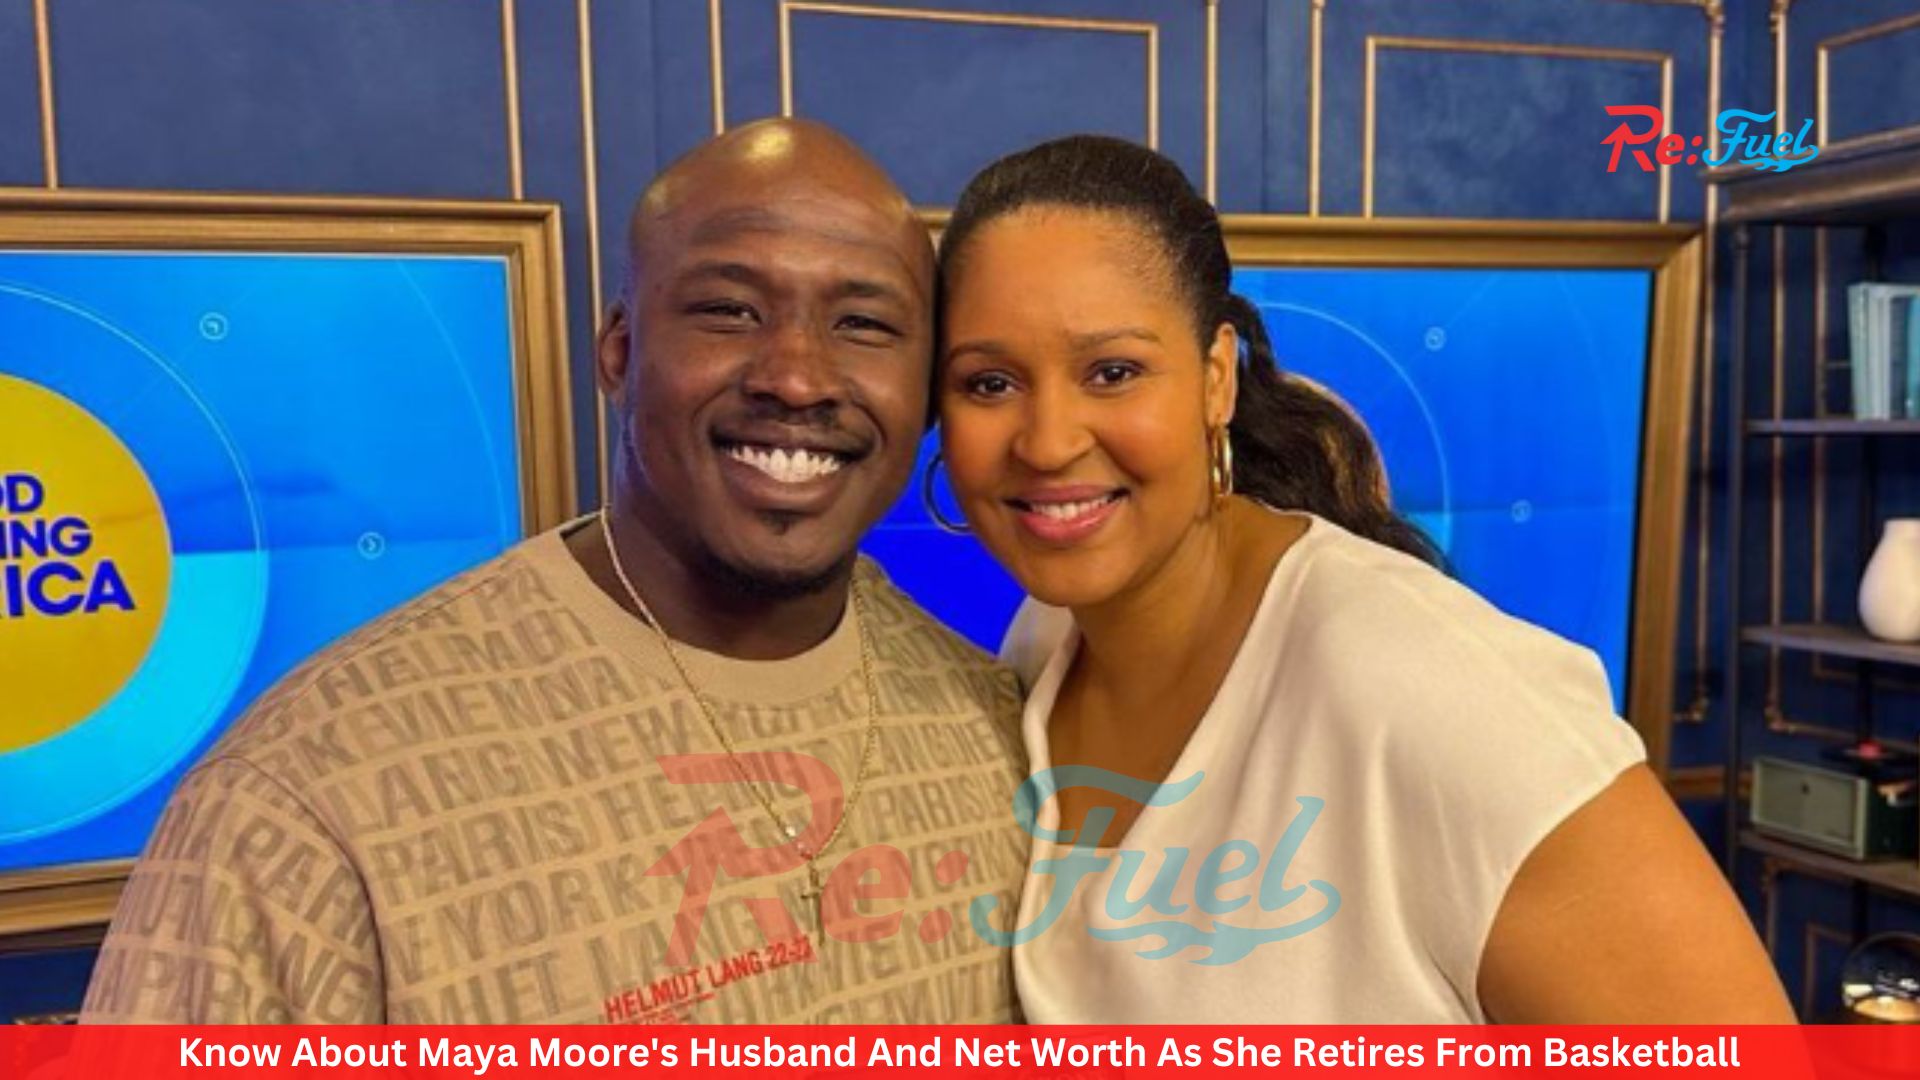 Know About Maya Moore's Husband And Net Worth As She Retires From Basketball